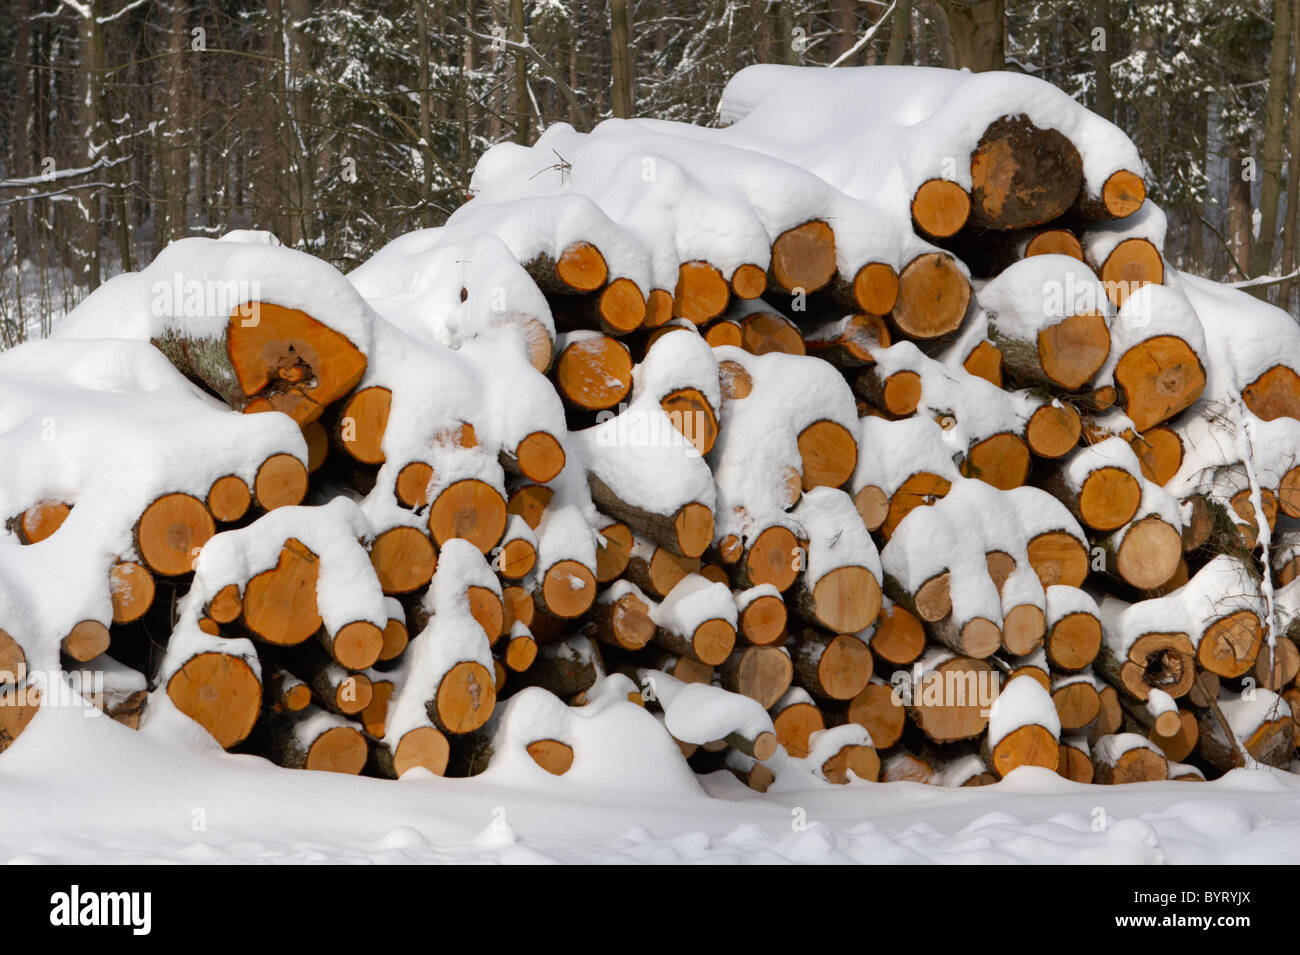 Snow covered stack of wood Stock Photo